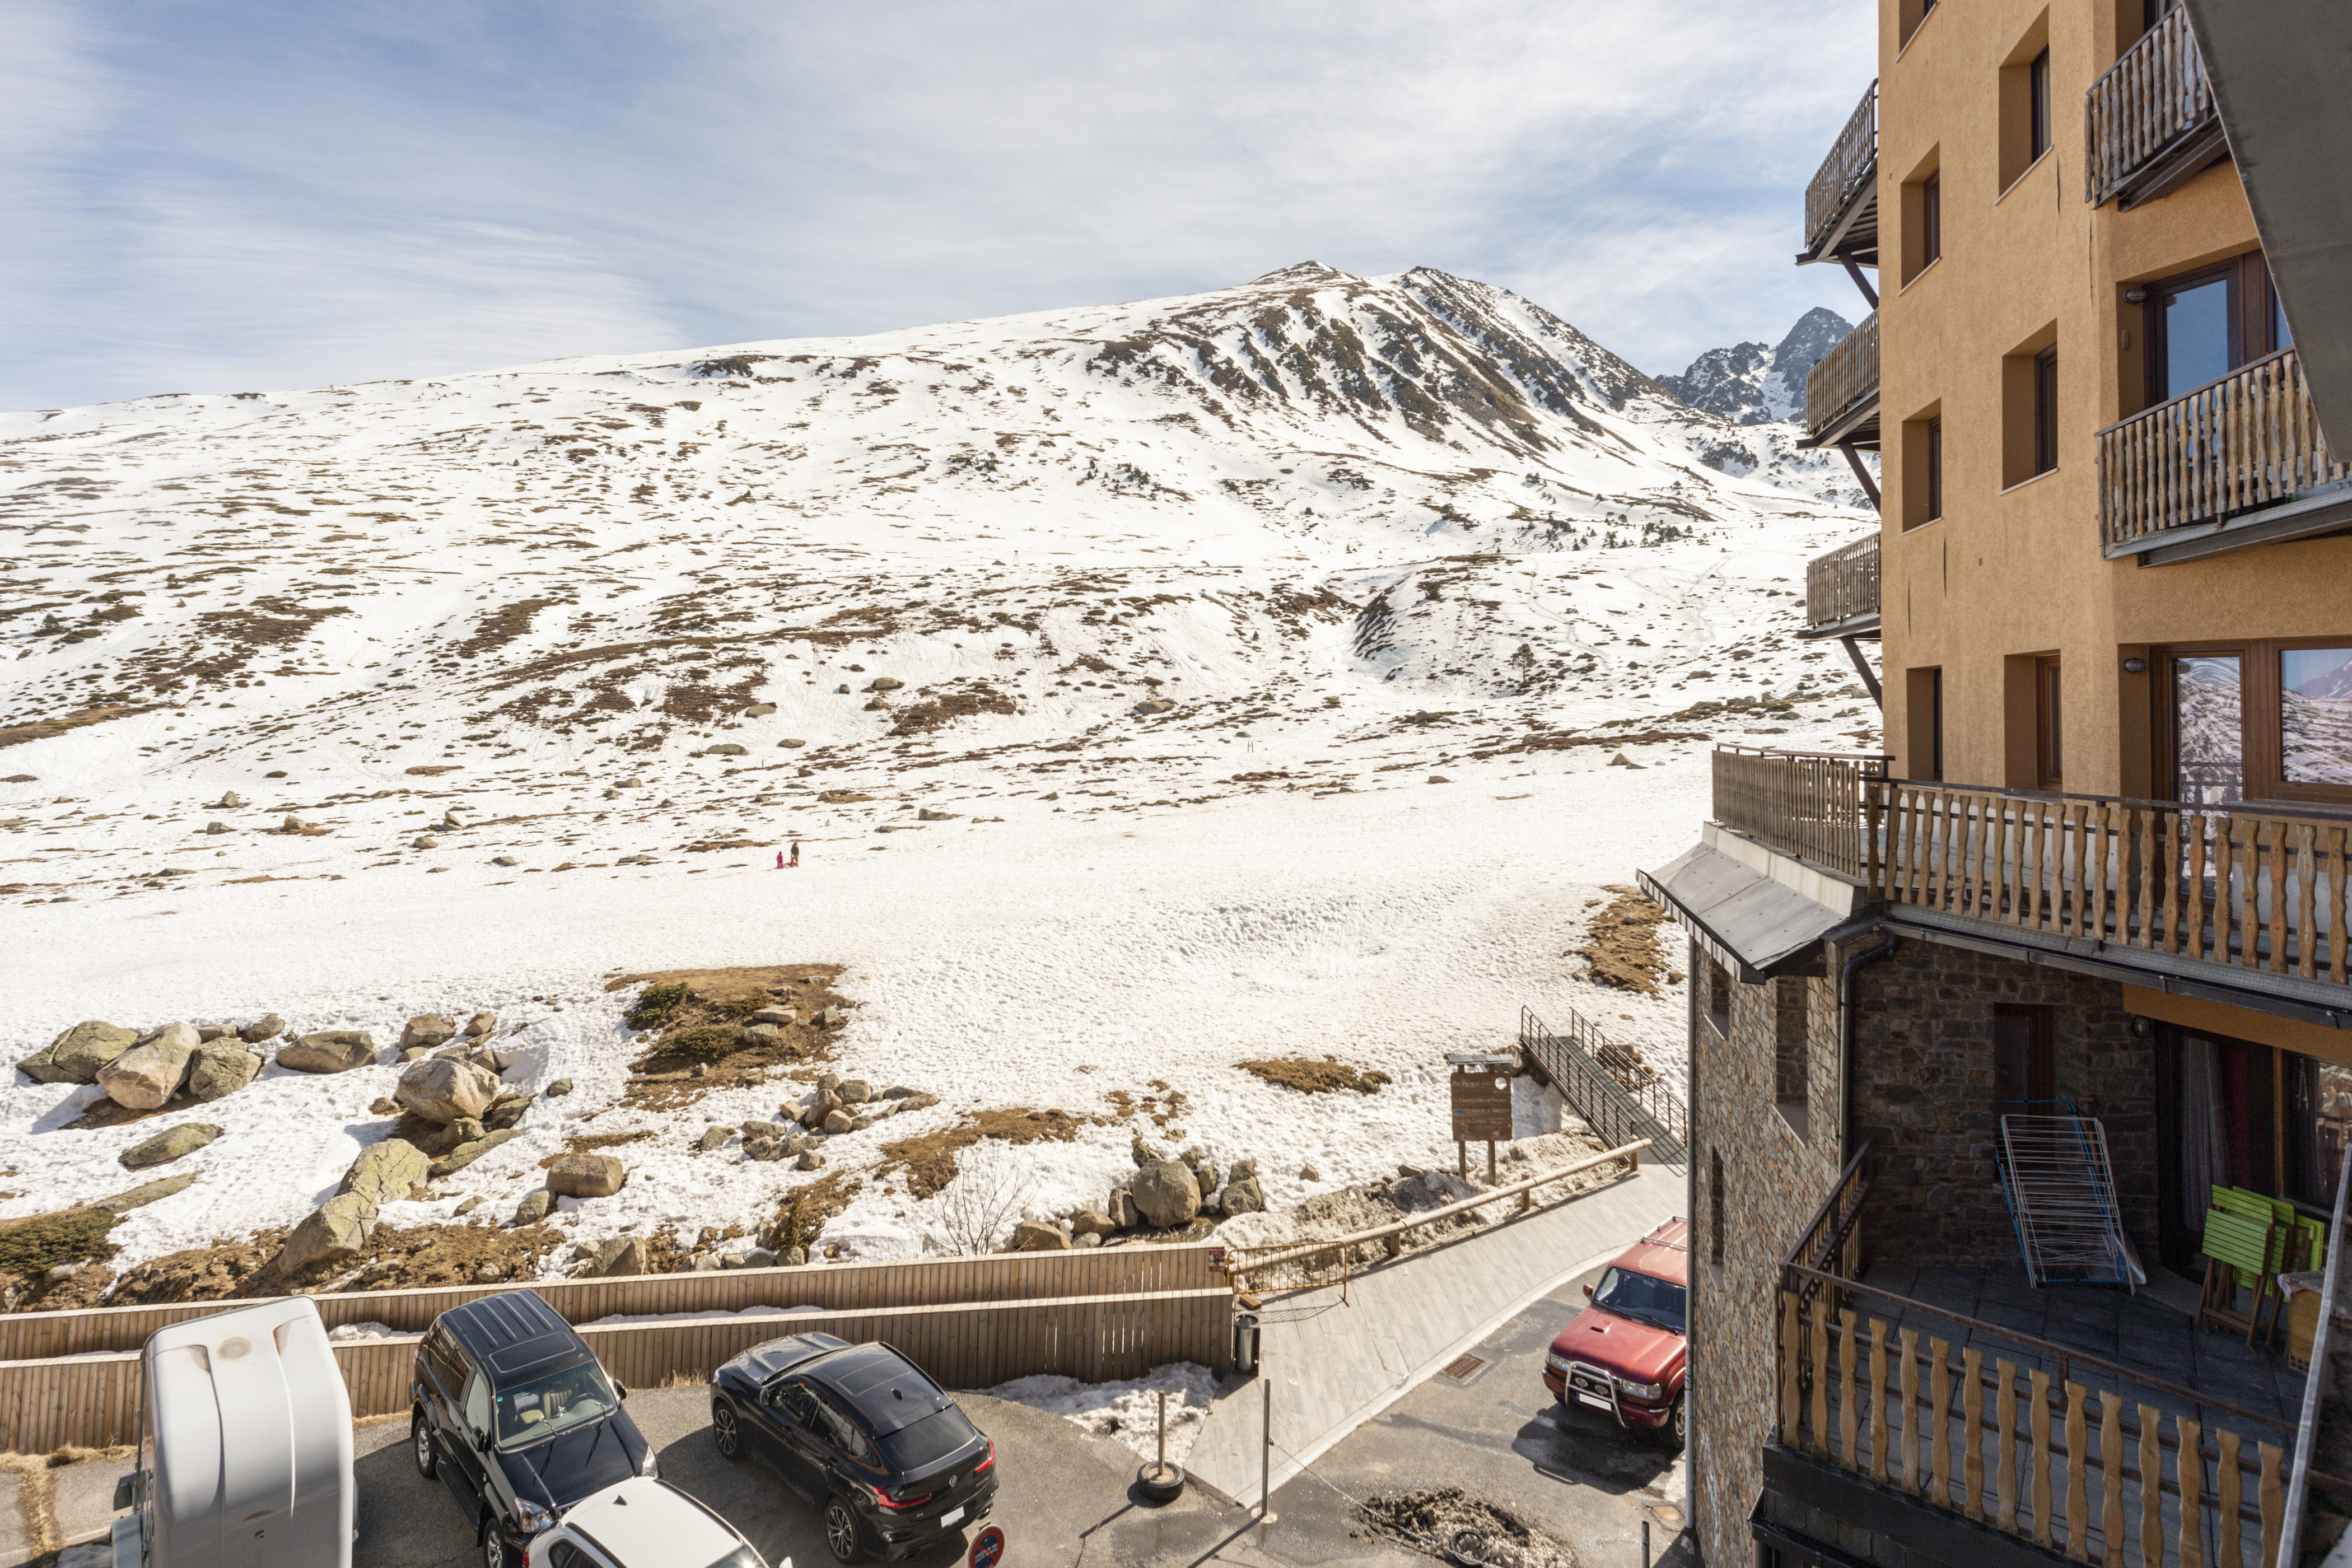 View to a mountain with snow and in the right corner a building, in the bottom some cars in a parking lot.